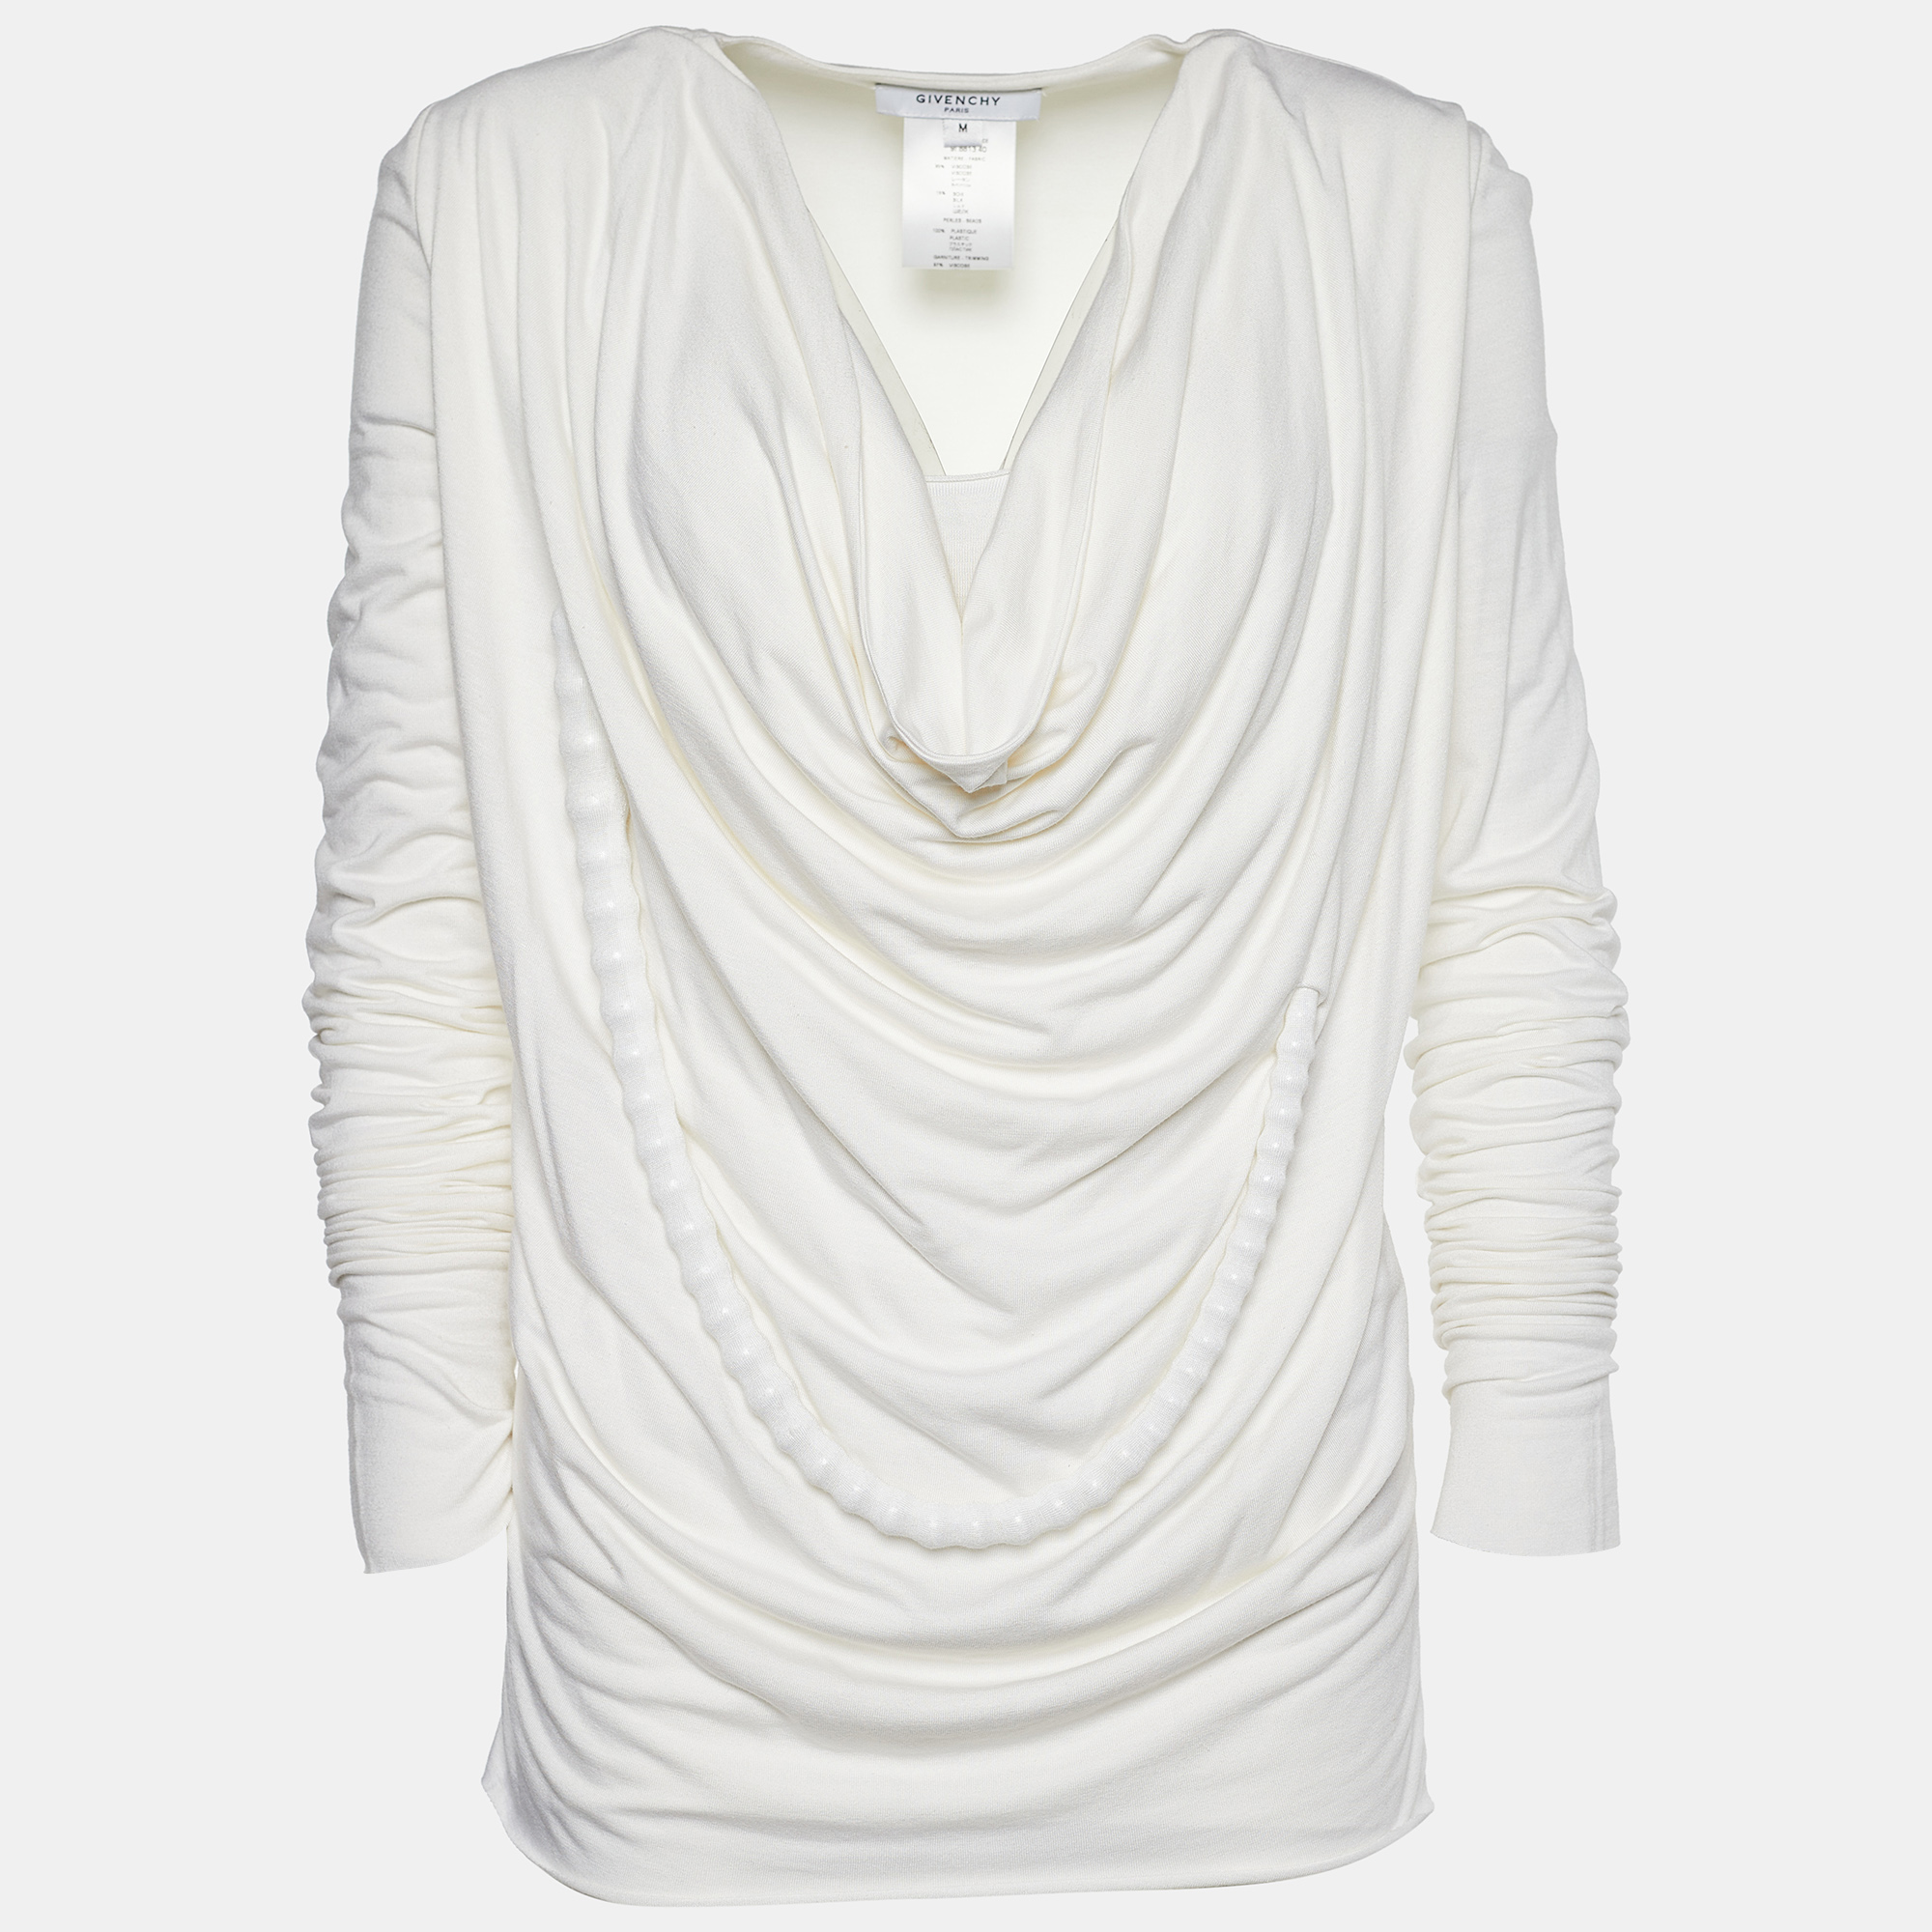 Givenchy off-white stretch knit beaded chain detail draped blouse m